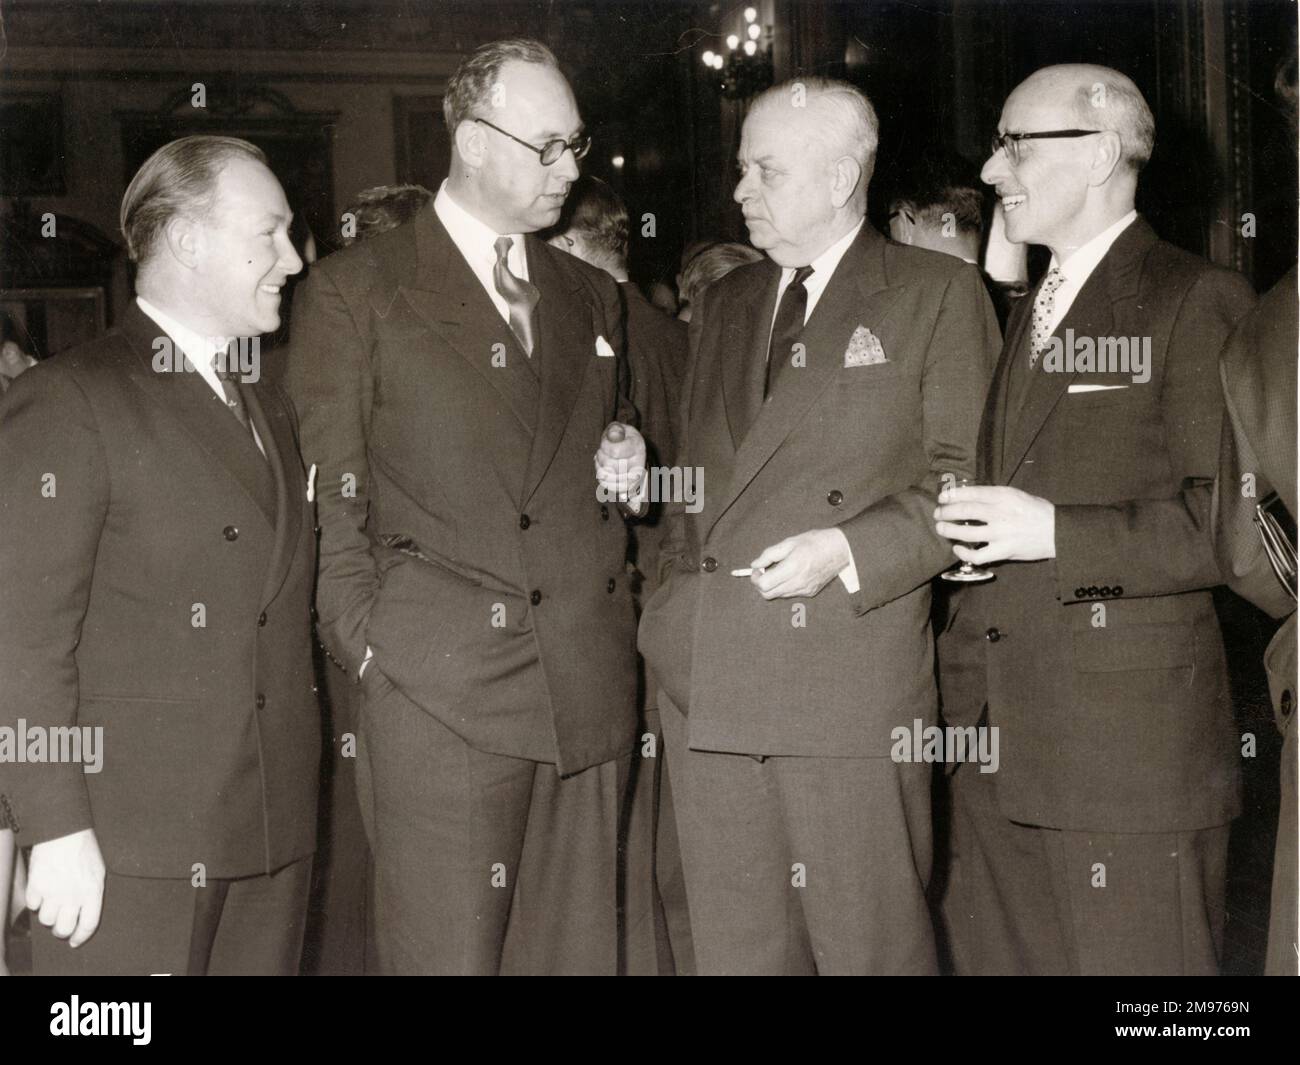 From left: John W.R. Taylor, Peter Masefield, Leonard Bridgeman and H. Sampson at Jane’s 50th anniversary Golden Jubilee party, December 1959. Over the first 80 years of its publishing history Jane’s was edited by just four people - Fred T. Jane (1909-1916), C.G. Grey (1916-1941), Leonard Bridgeman (1941-1959) and John W.R. Taylor (1959-1989). Stock Photo